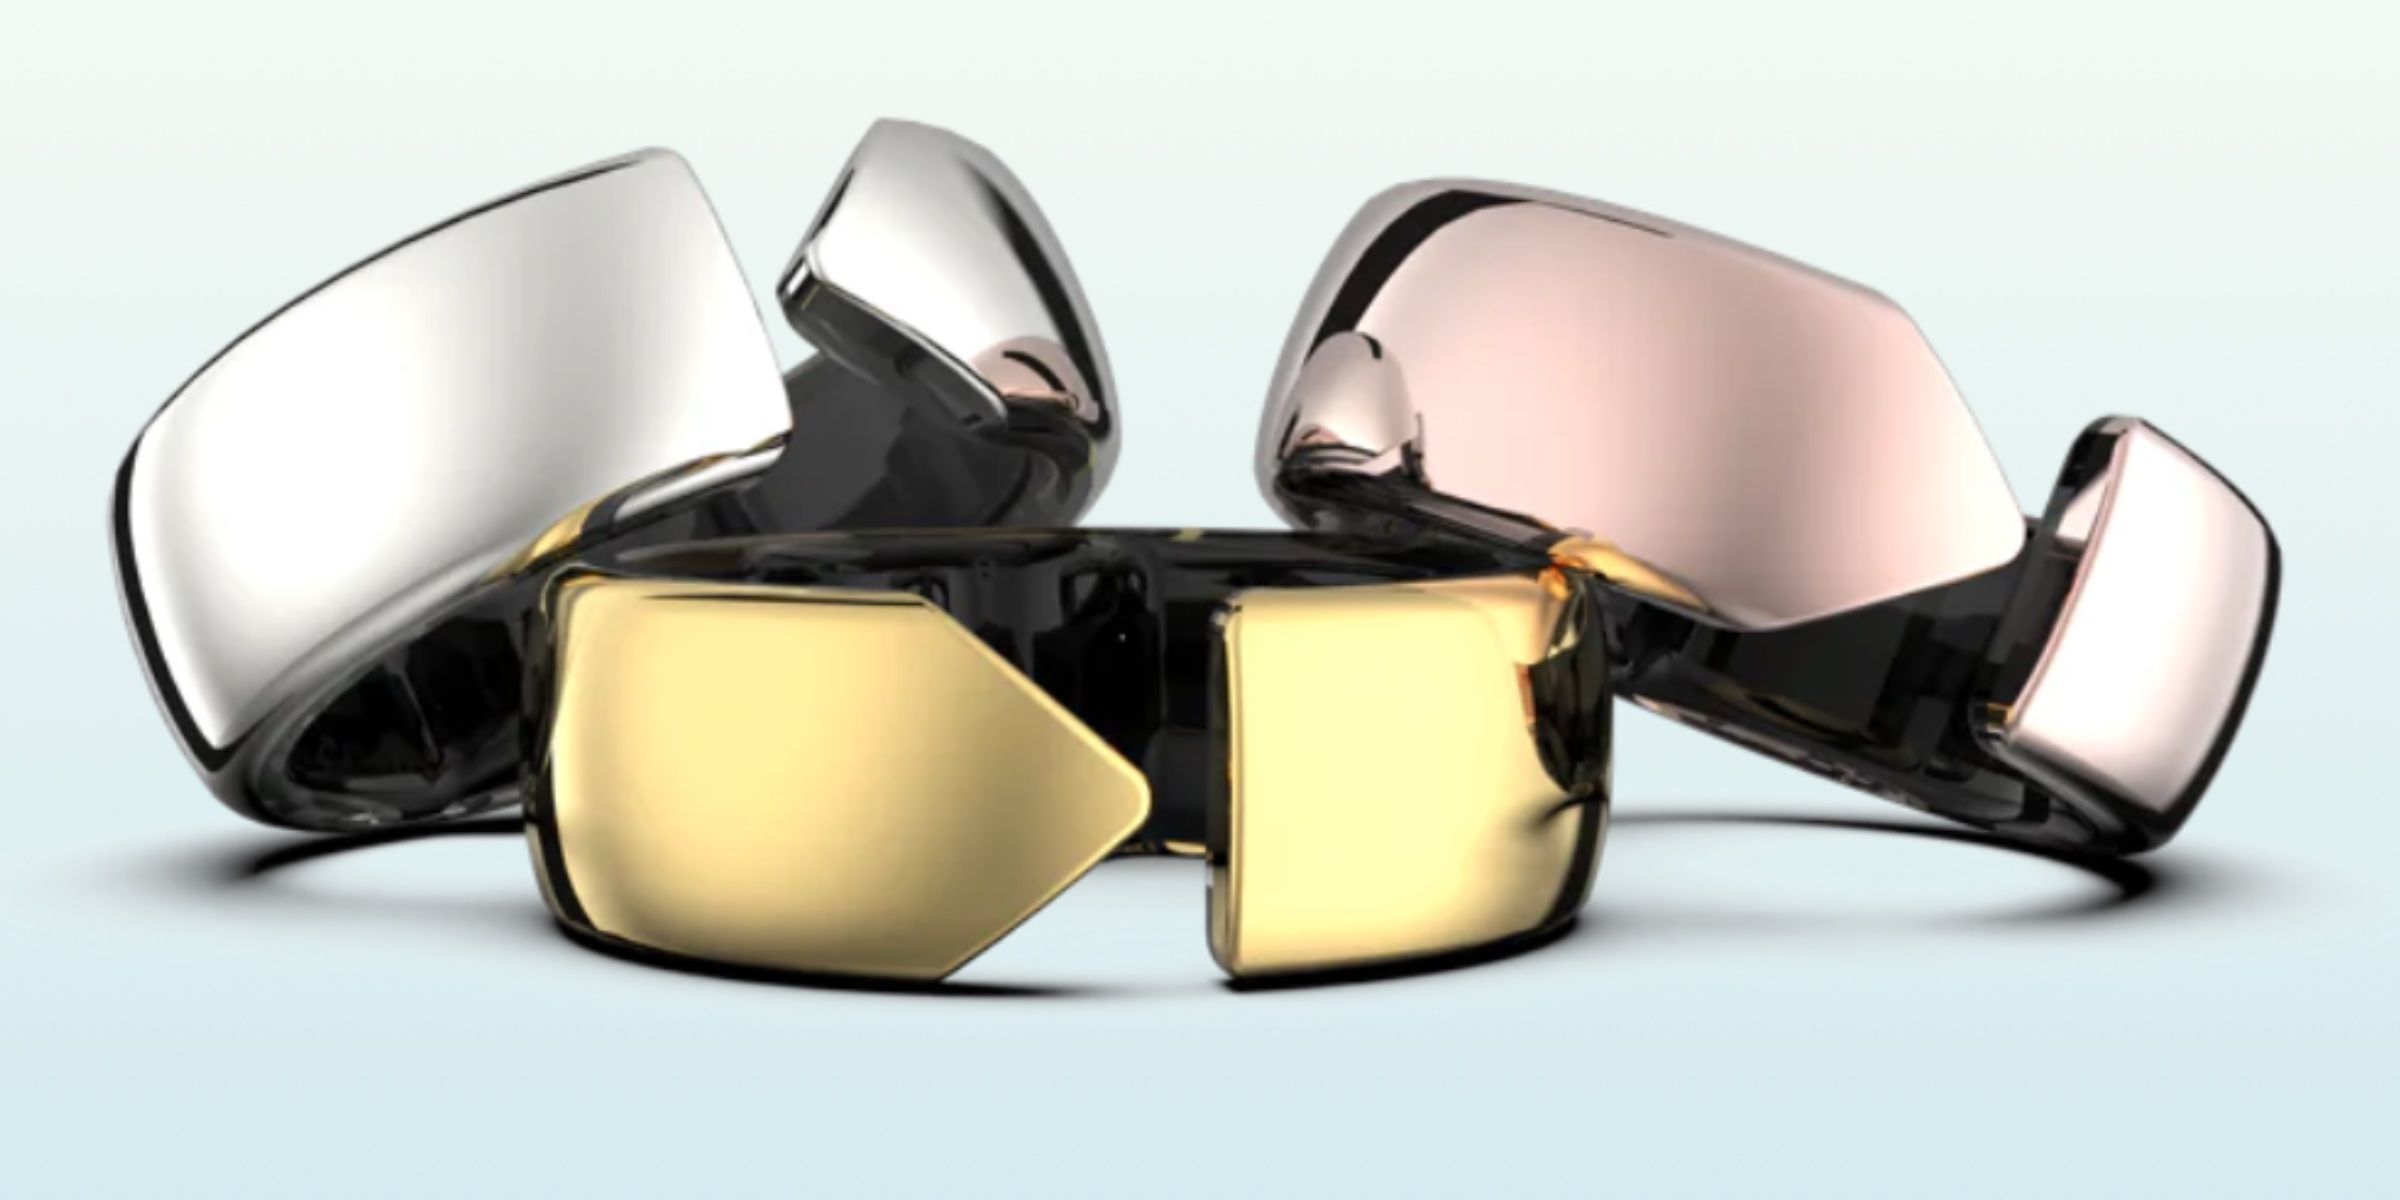 A promotional image of three Evie Smart Rings against a white background.